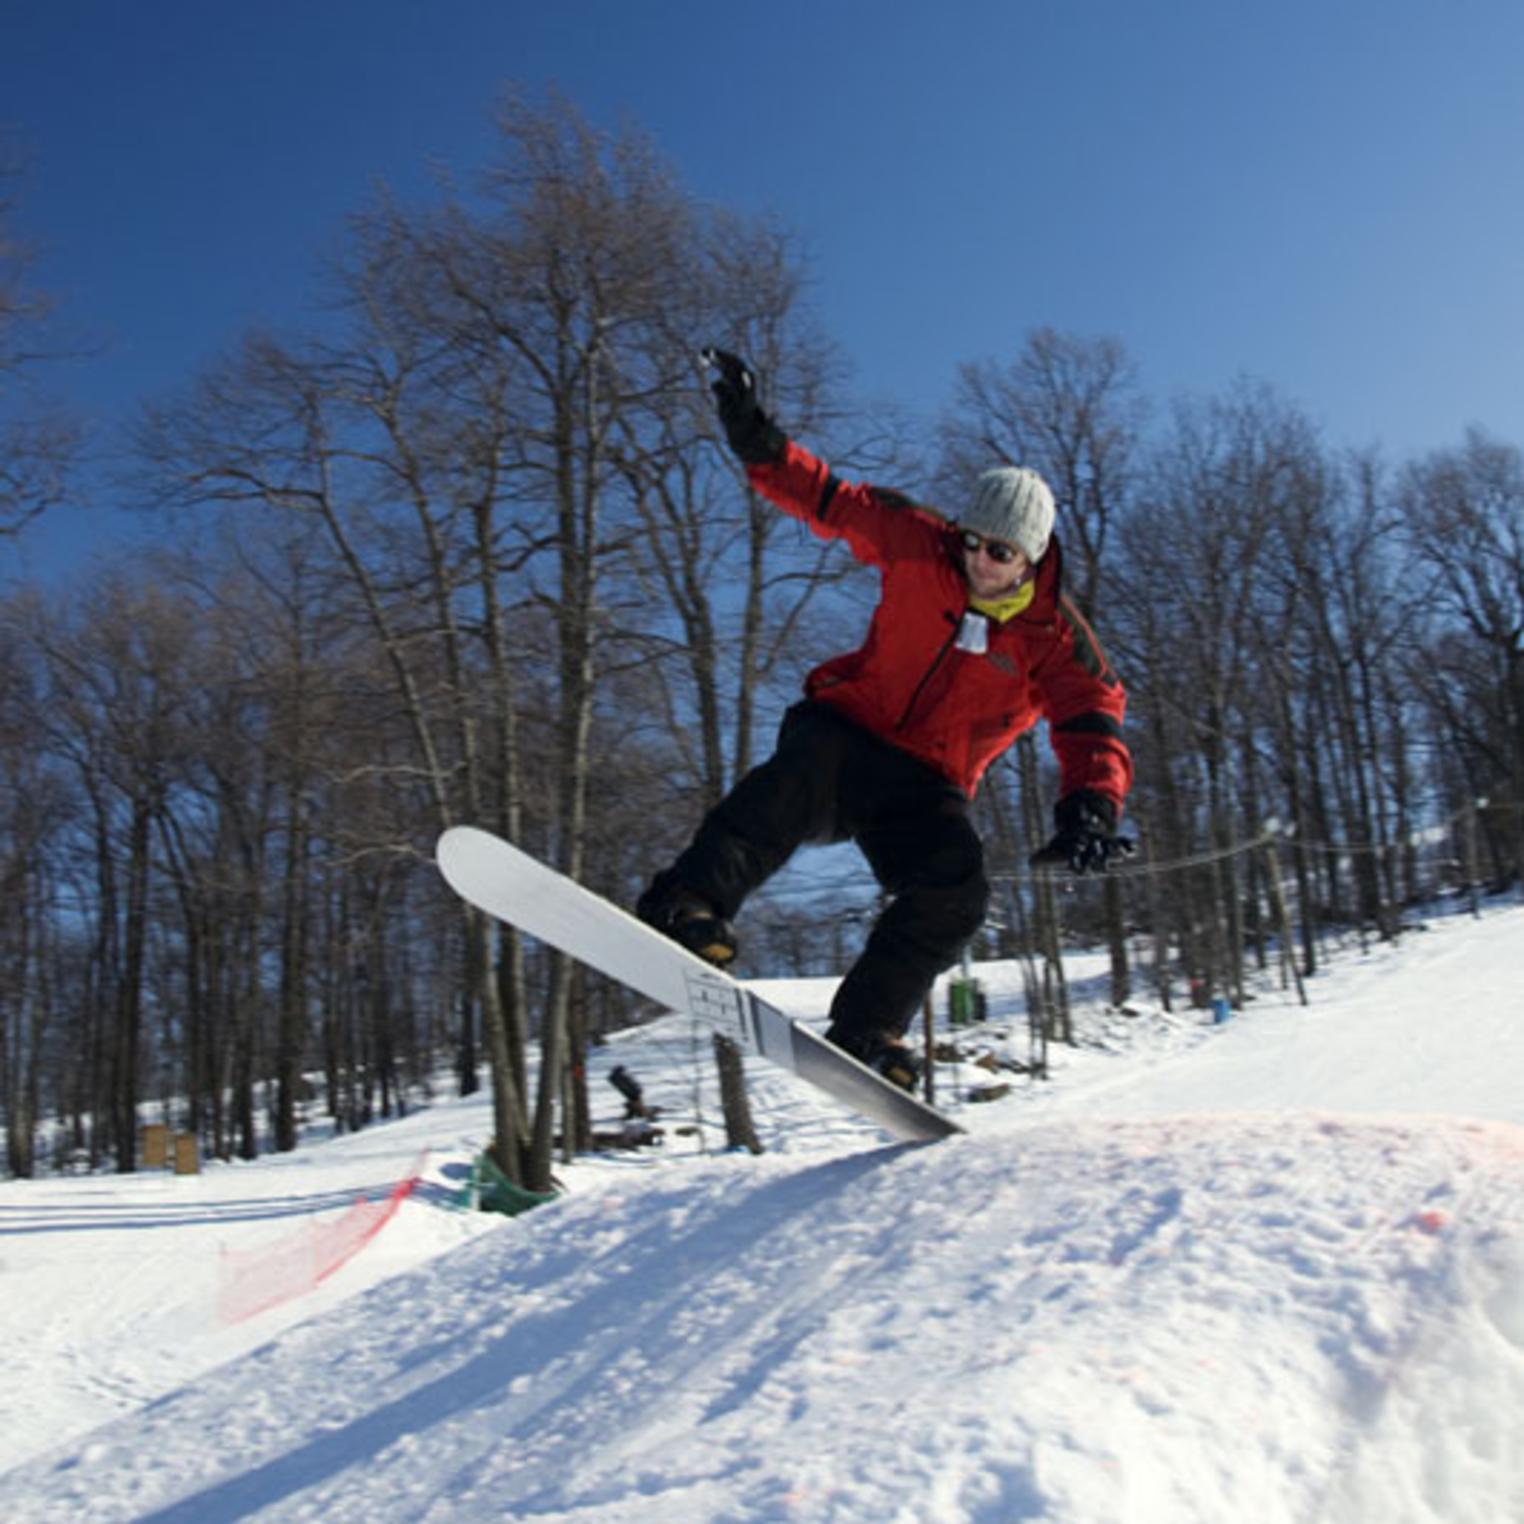 Snowboarding at Roundtop Mountain Resort - Lessons for all ages and abilities